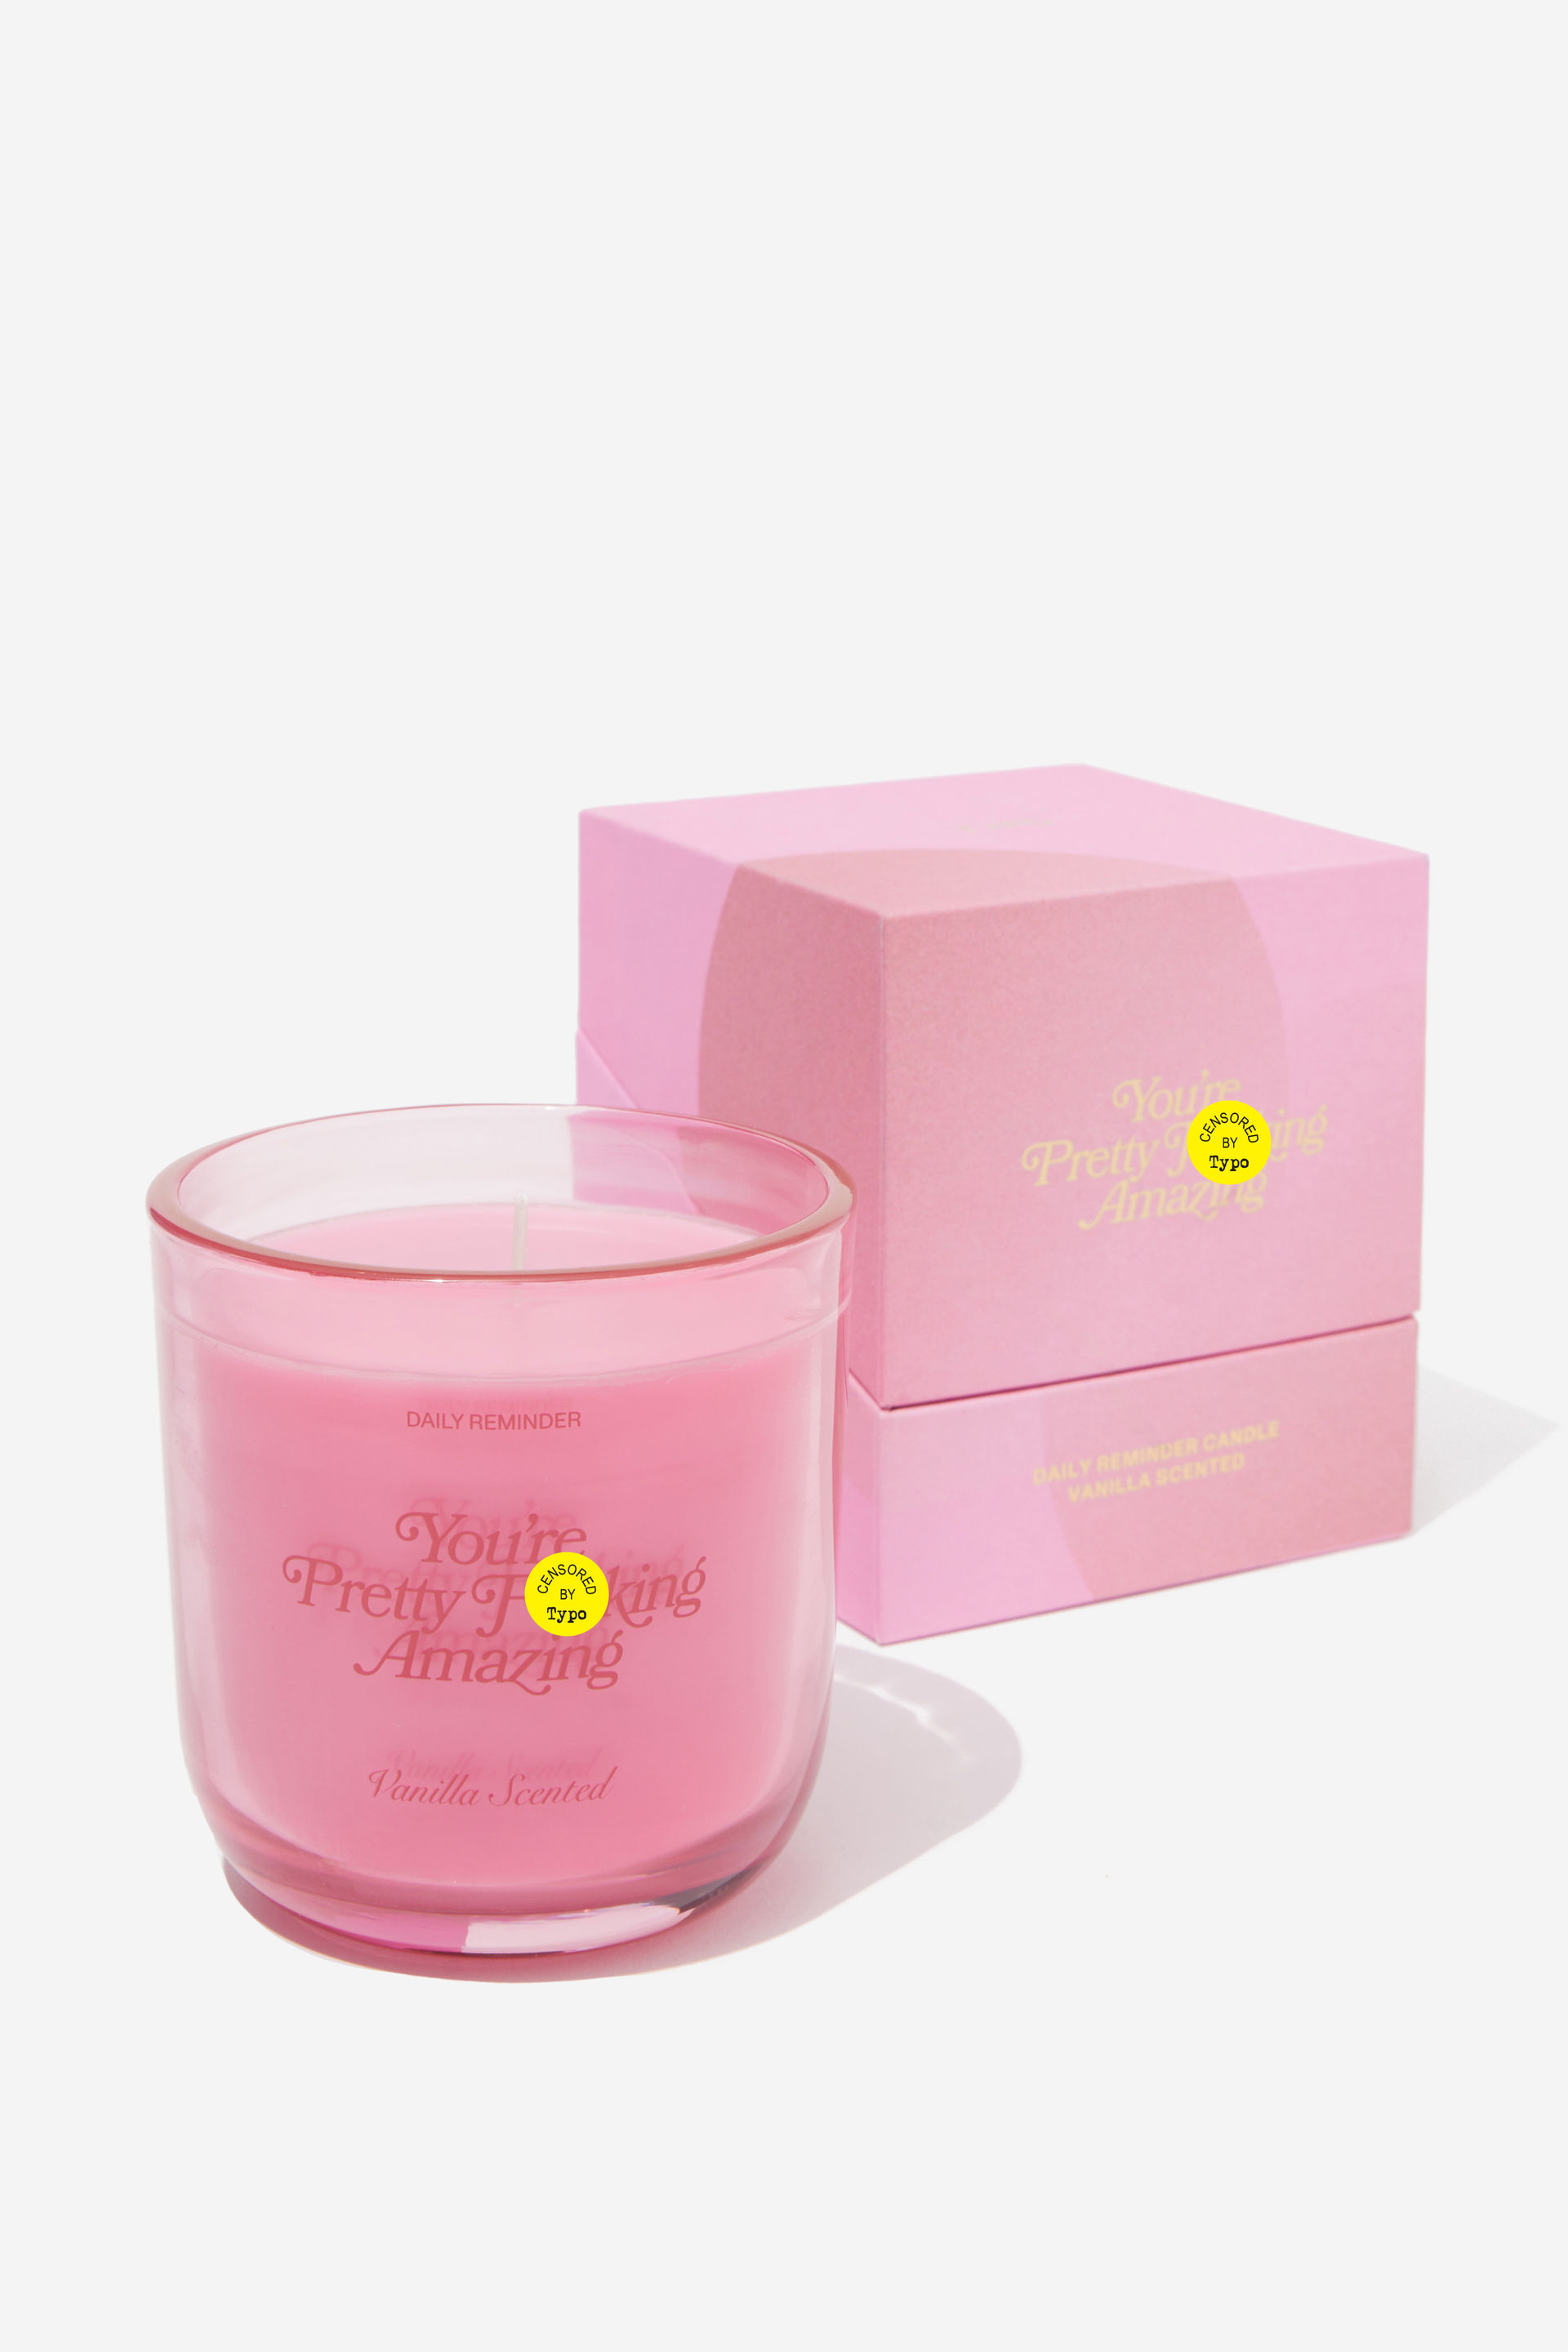 Typo - Daily Reminder Candle - Red & pink pretty fu**ing amazing!!